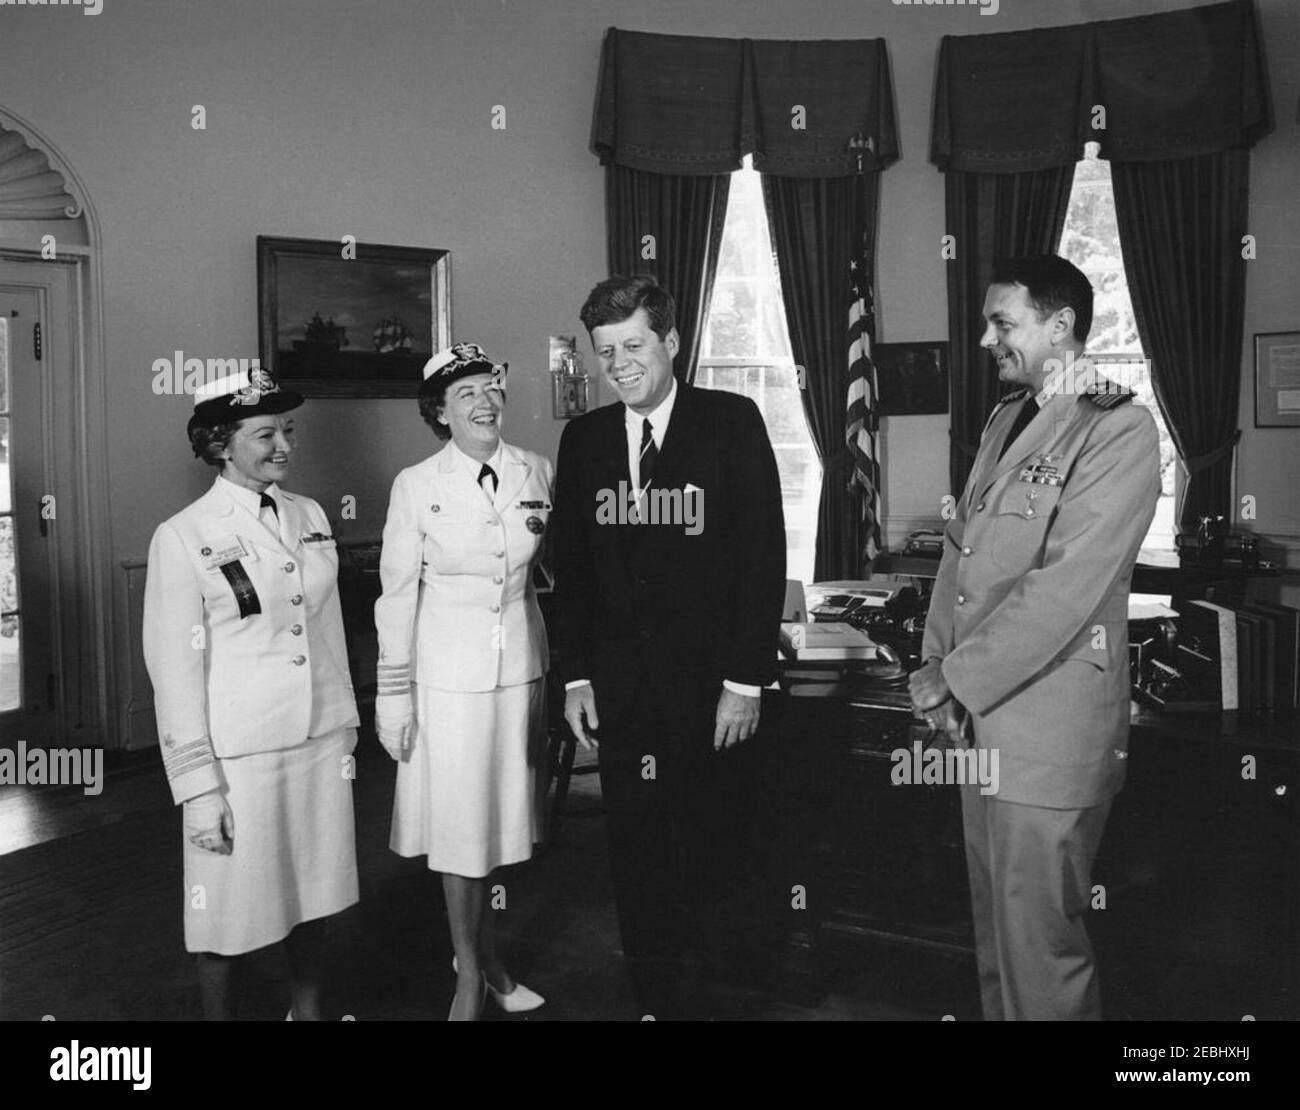 Visit of Captain Winifred Quick Collins, Director of Women Accepted for Volunteer Emergency Service (WAVES), 9:48AM. President John F. Kennedy visits with U.S. Navy officers. Left to right: Women Accepted for Volunteer Emergency Service (WAVES) officer, Captain Irene Wolensky; Director of WAVES, Captain Winifred Quick Collins; President Kennedy; and Naval Aide to the President, Captain Tazewell T. Shepard, Jr. Oval Office, White House, Washington, D.C. Stock Photo